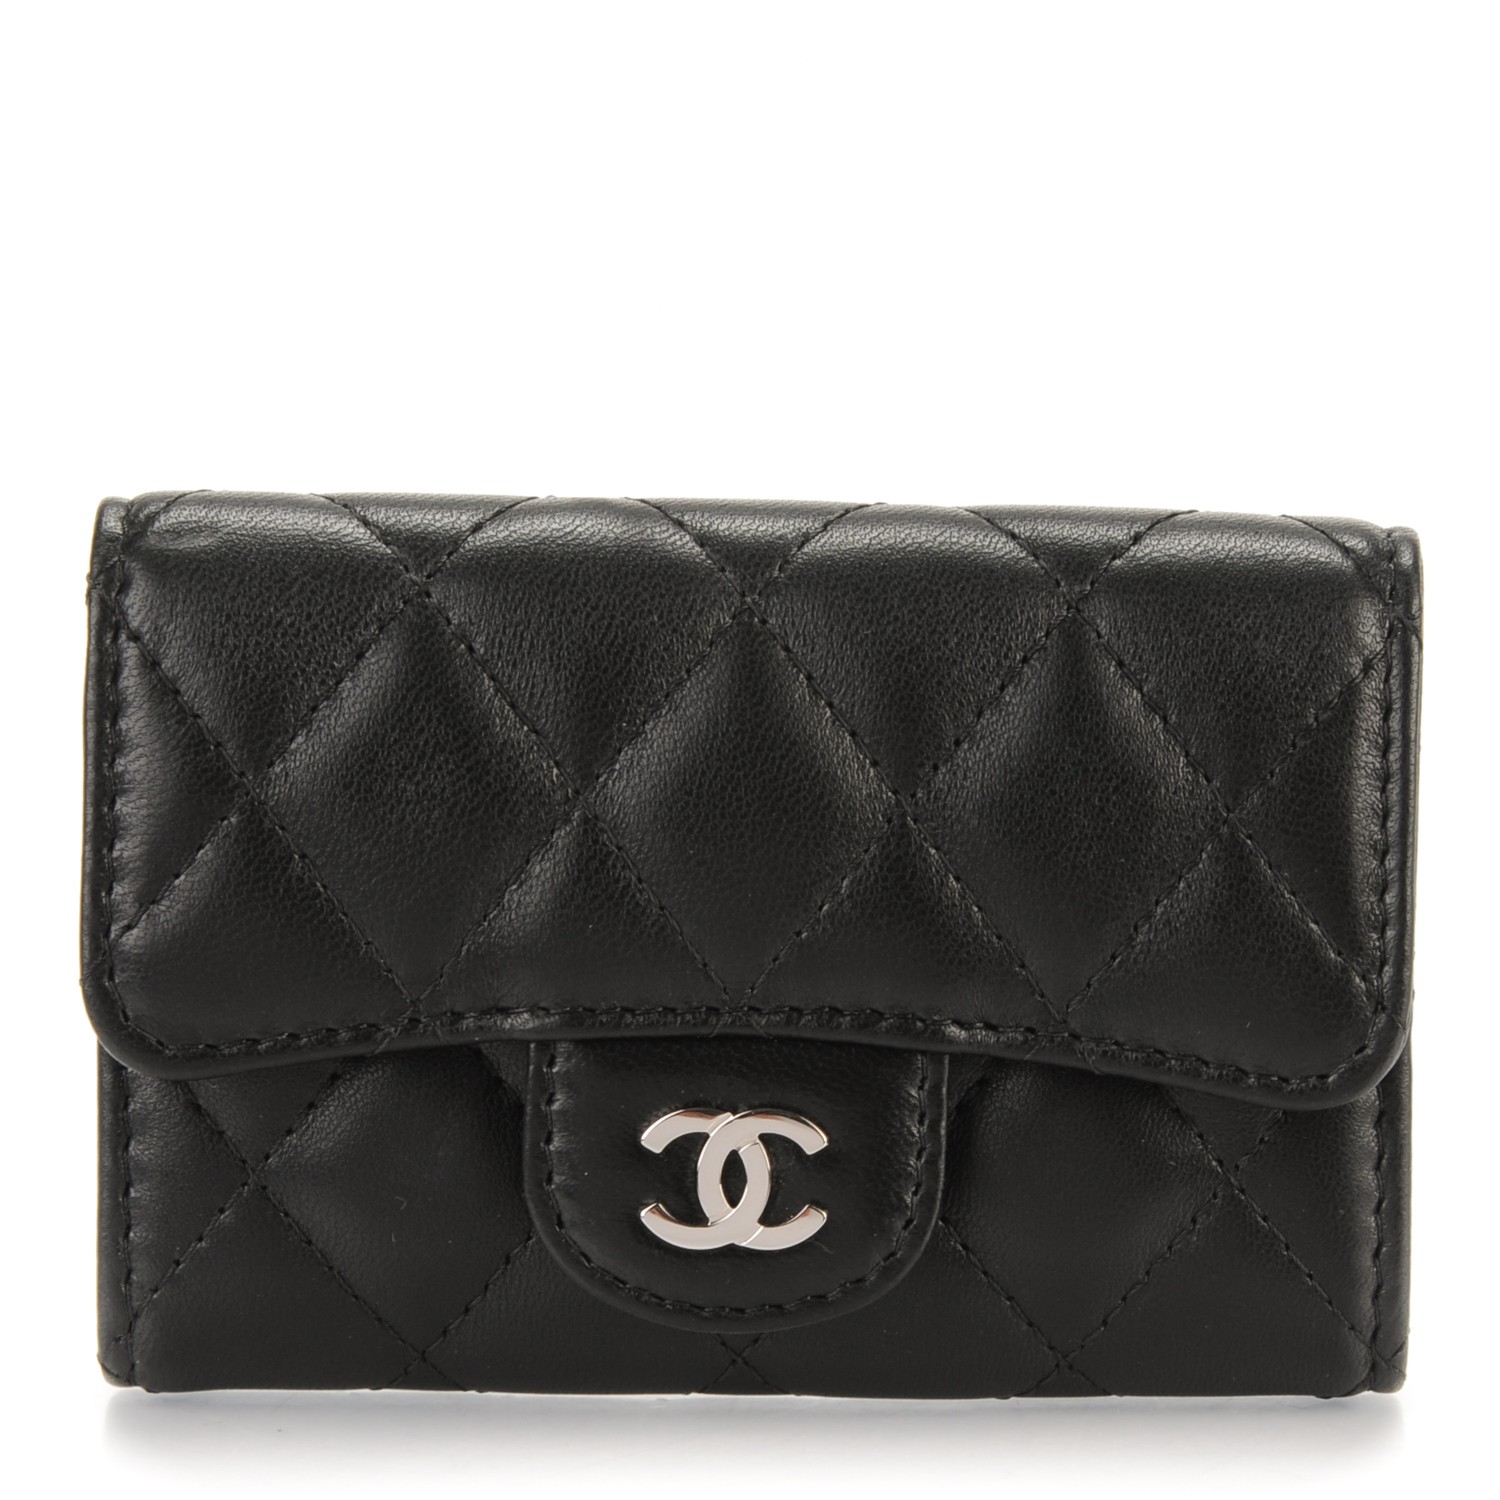 CHANEL Lambskin Quilted Flap Card Holder Black 163430